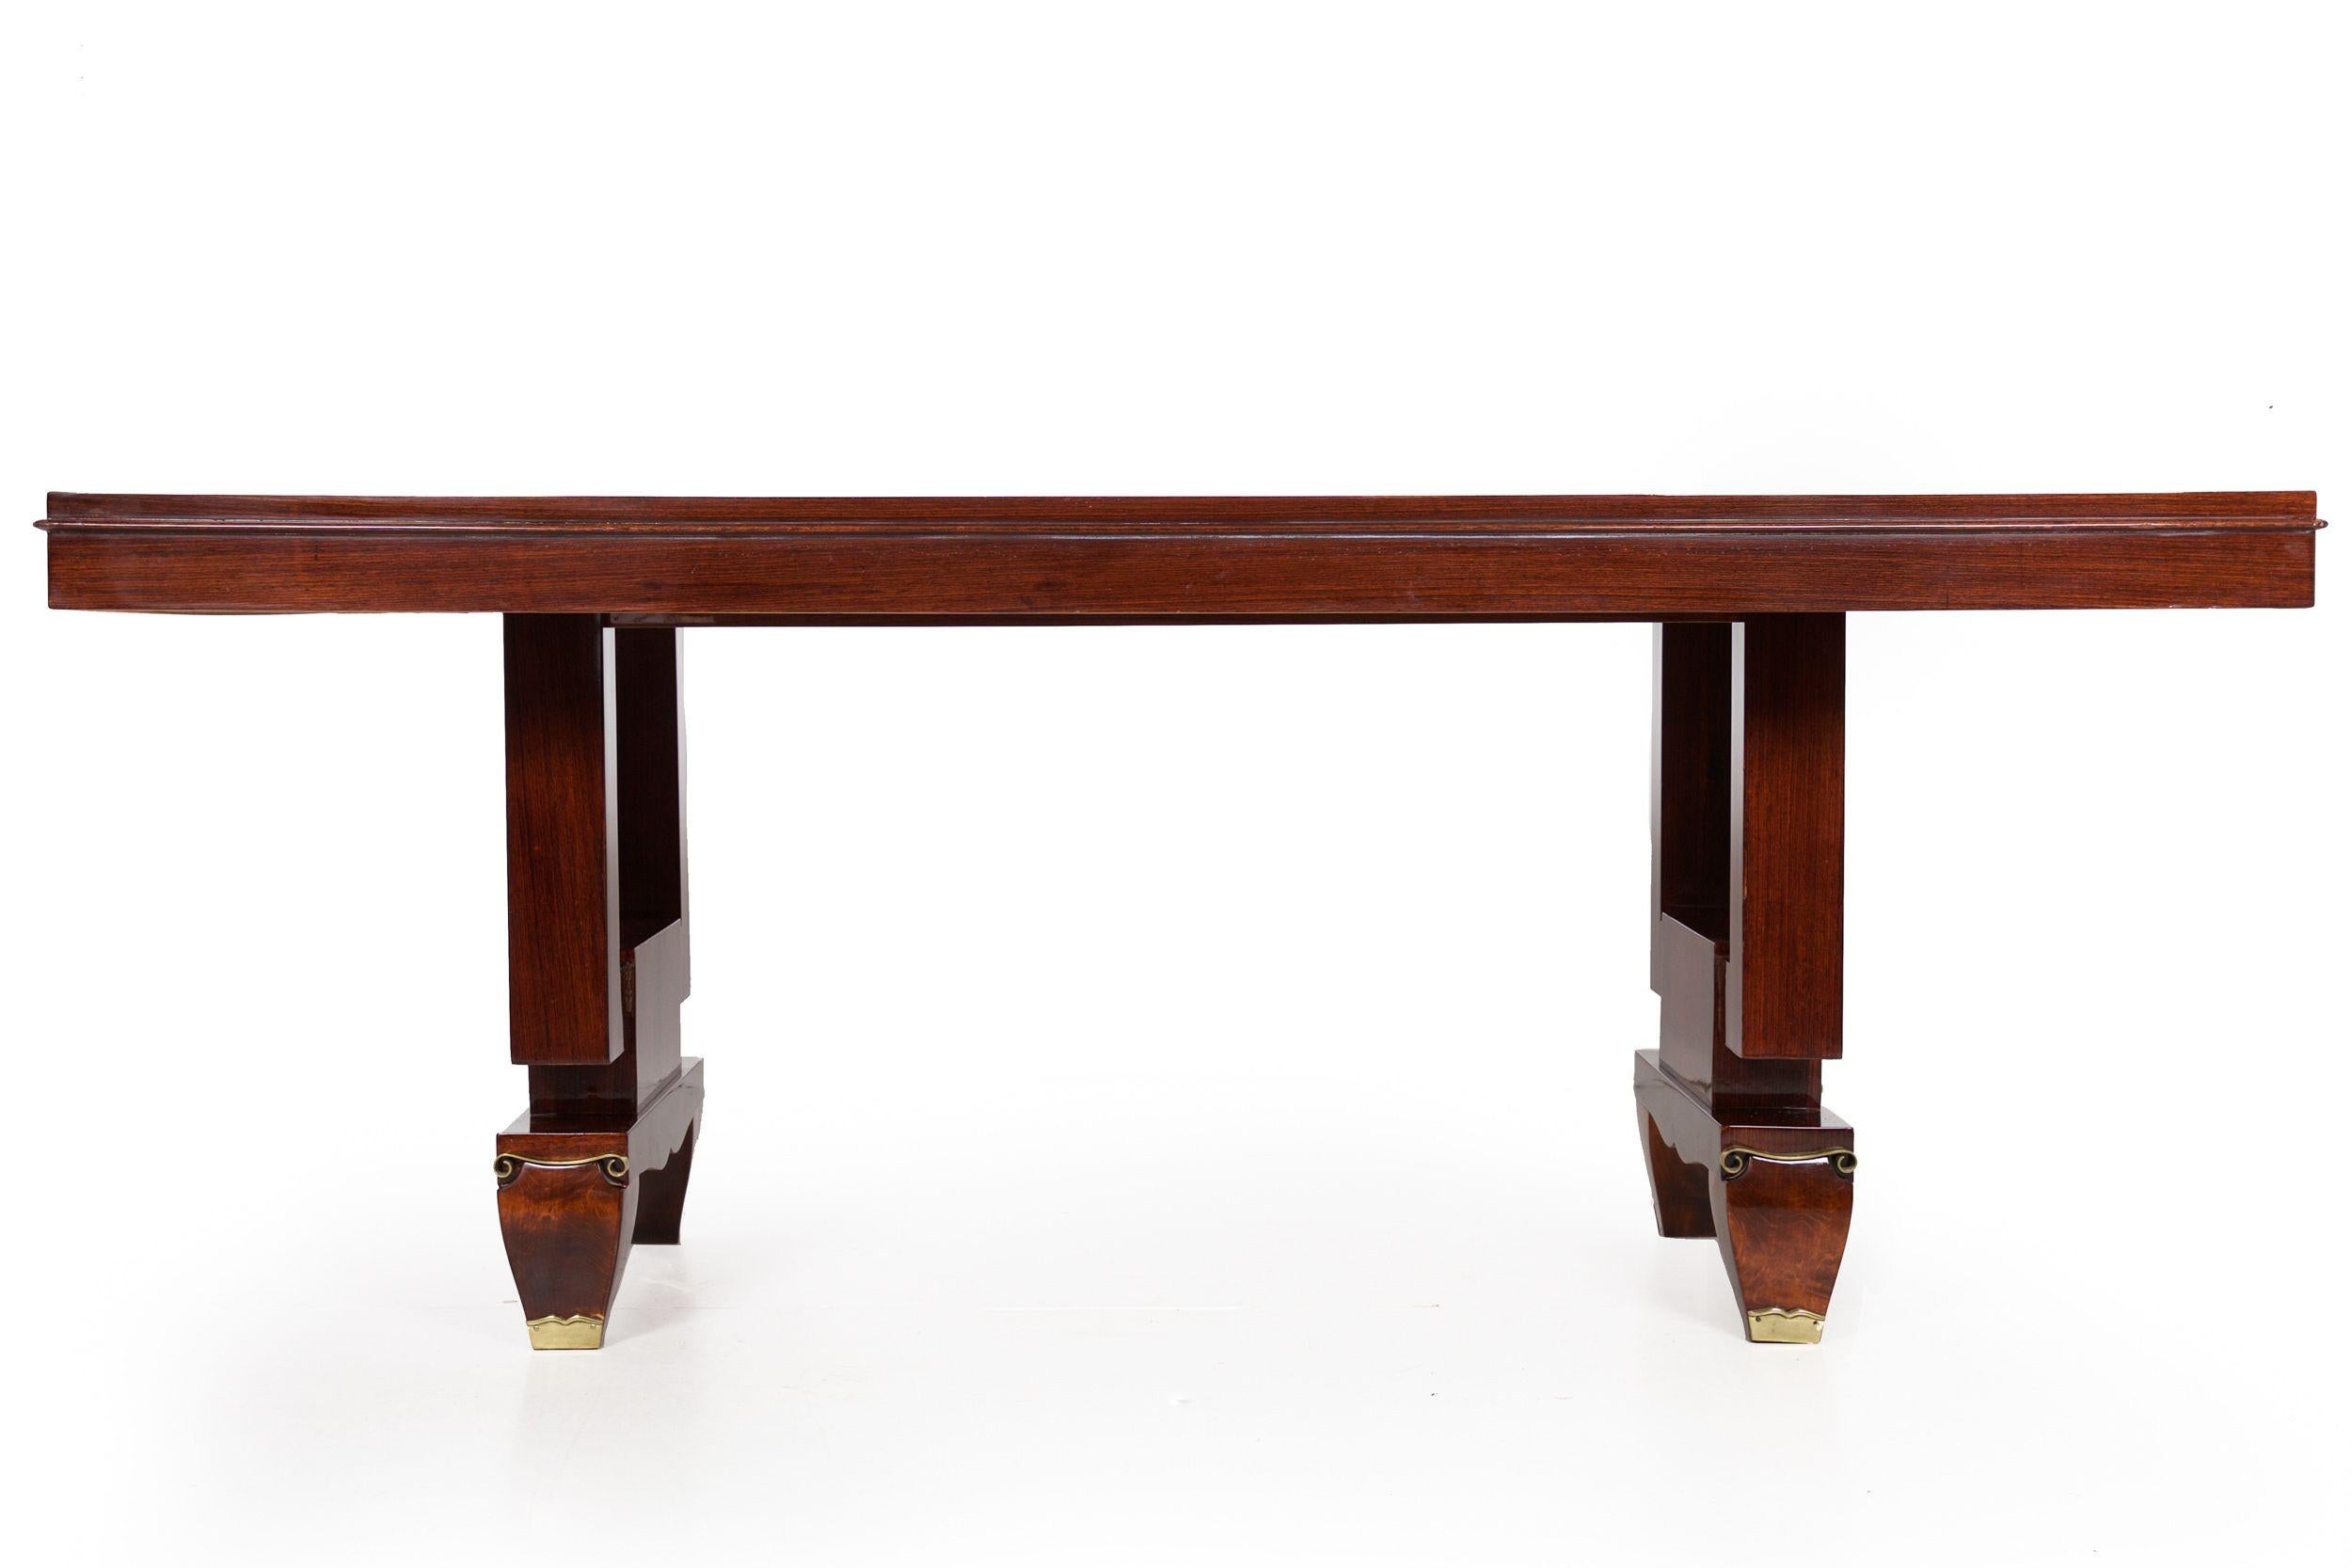 French Art Deco Inlaid Mother-of-Pearl Rosewood Dining Table, circa 1940s For Sale 11